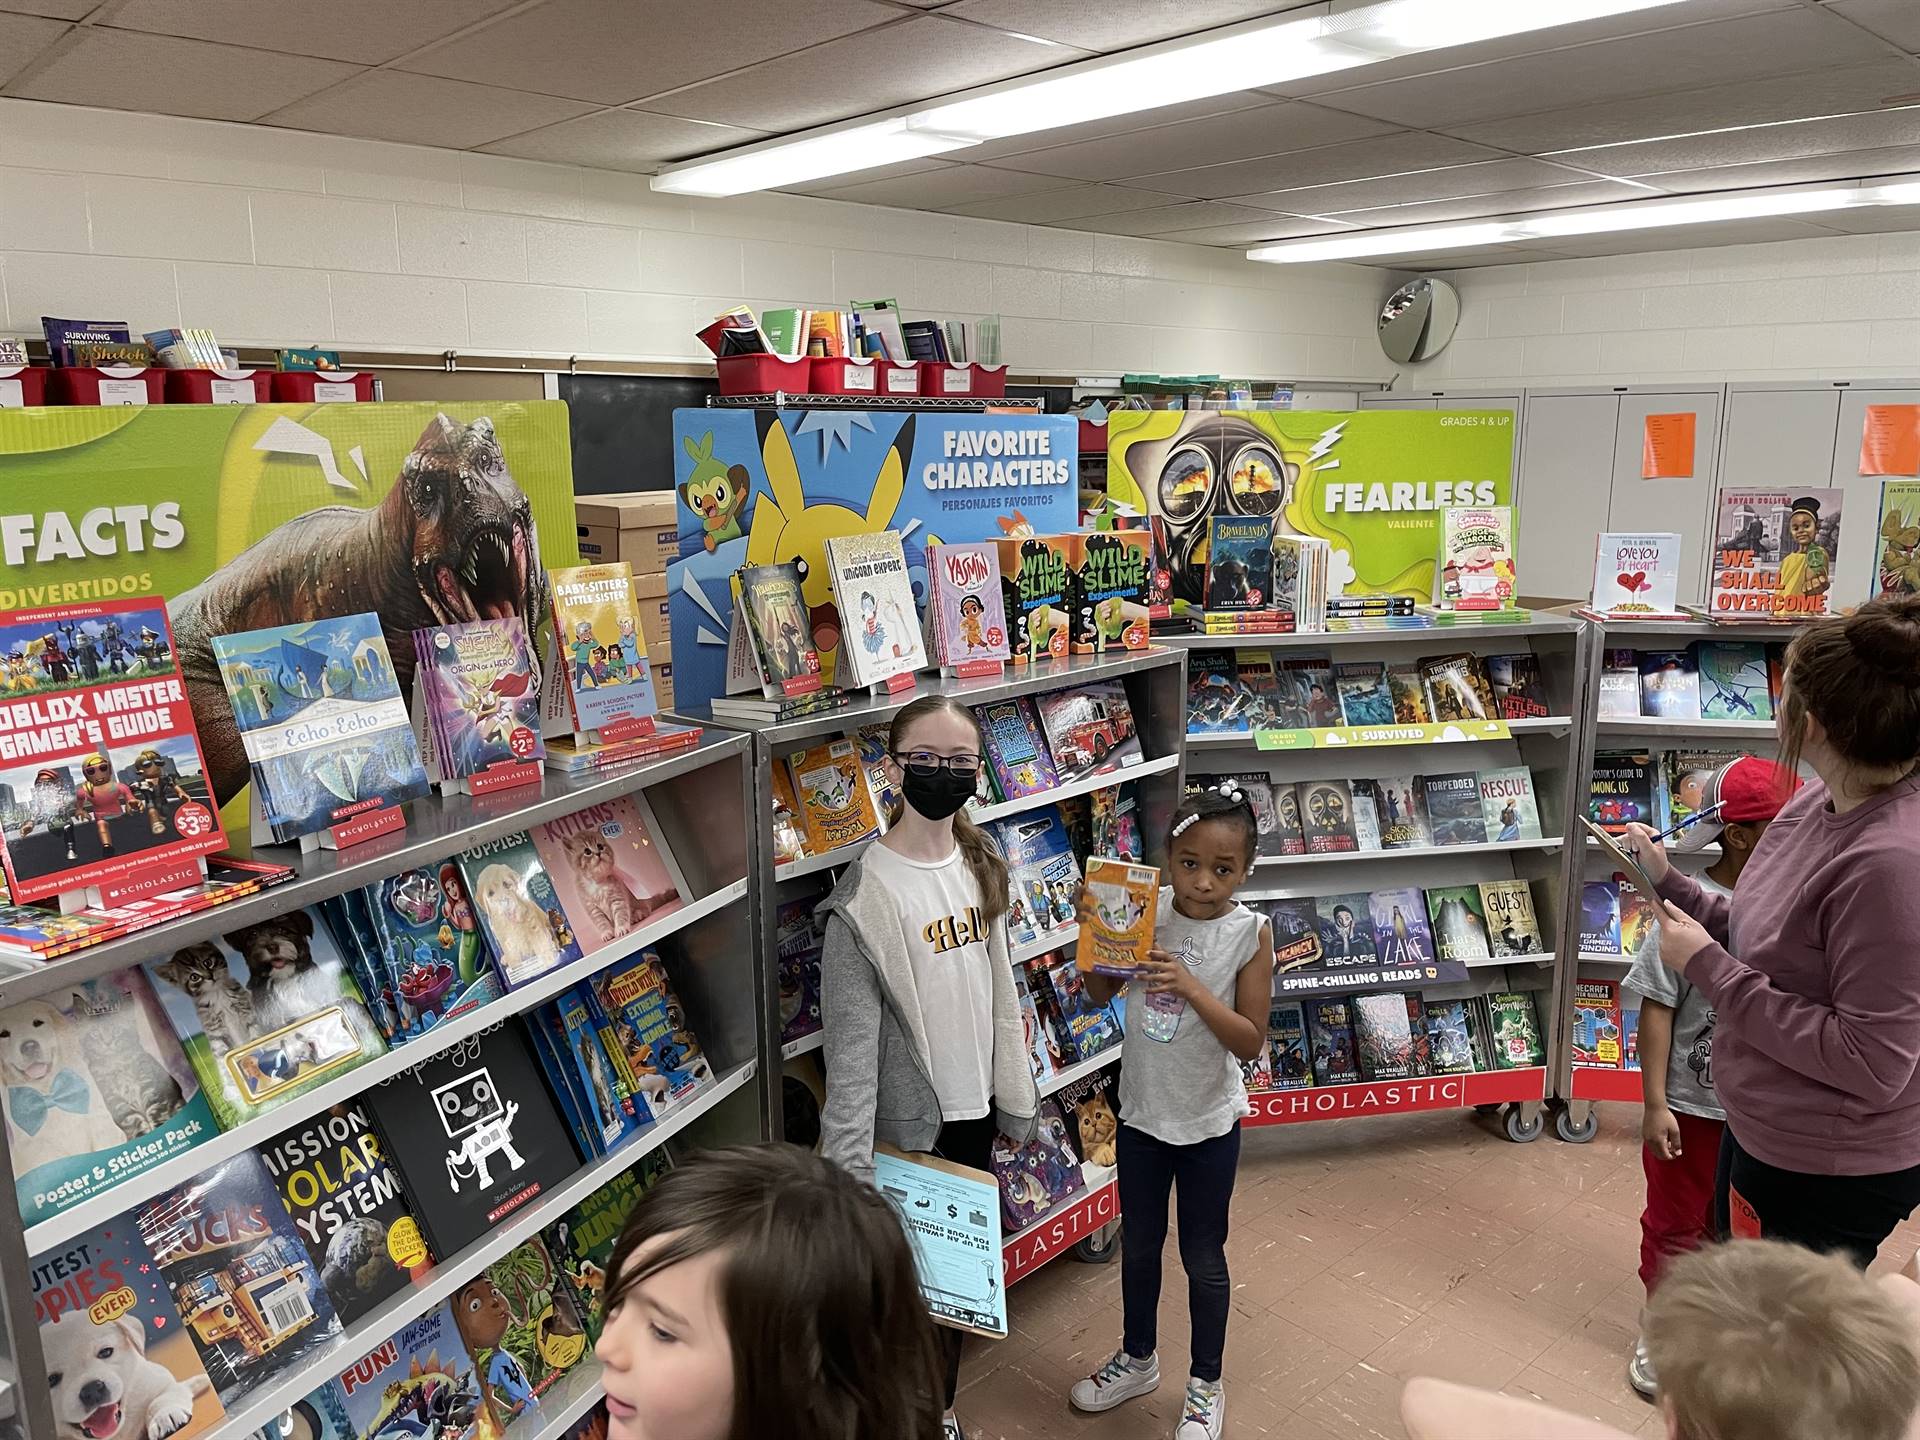 5th Grade Girls helping younger students at the book fair.